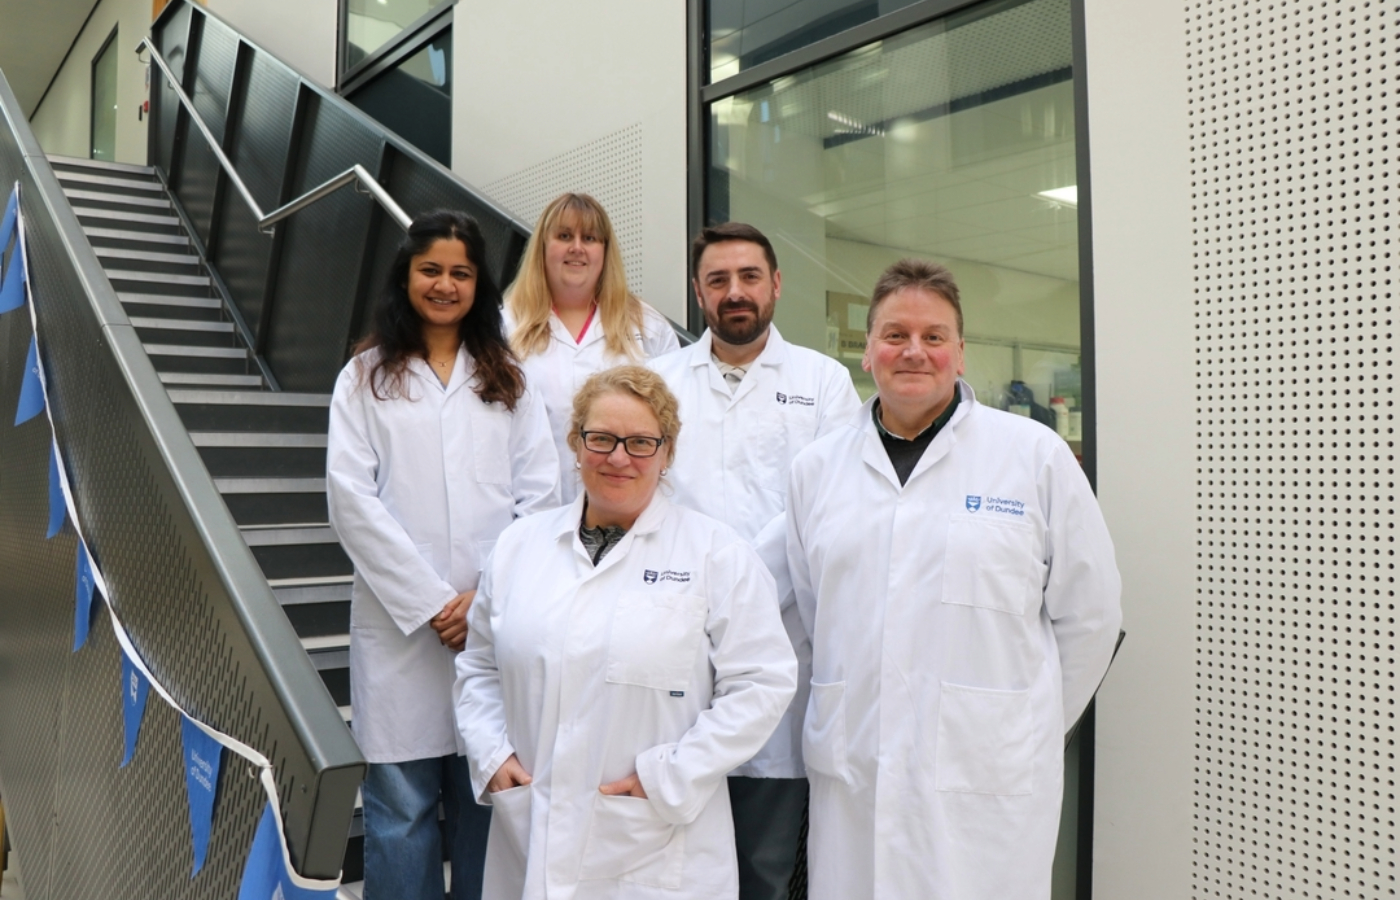 The University of Dundee signed a five-year agreement with ValiRx which focuses on 'early-stage cancer therapeutics and women’s health'. Photo: DDU.